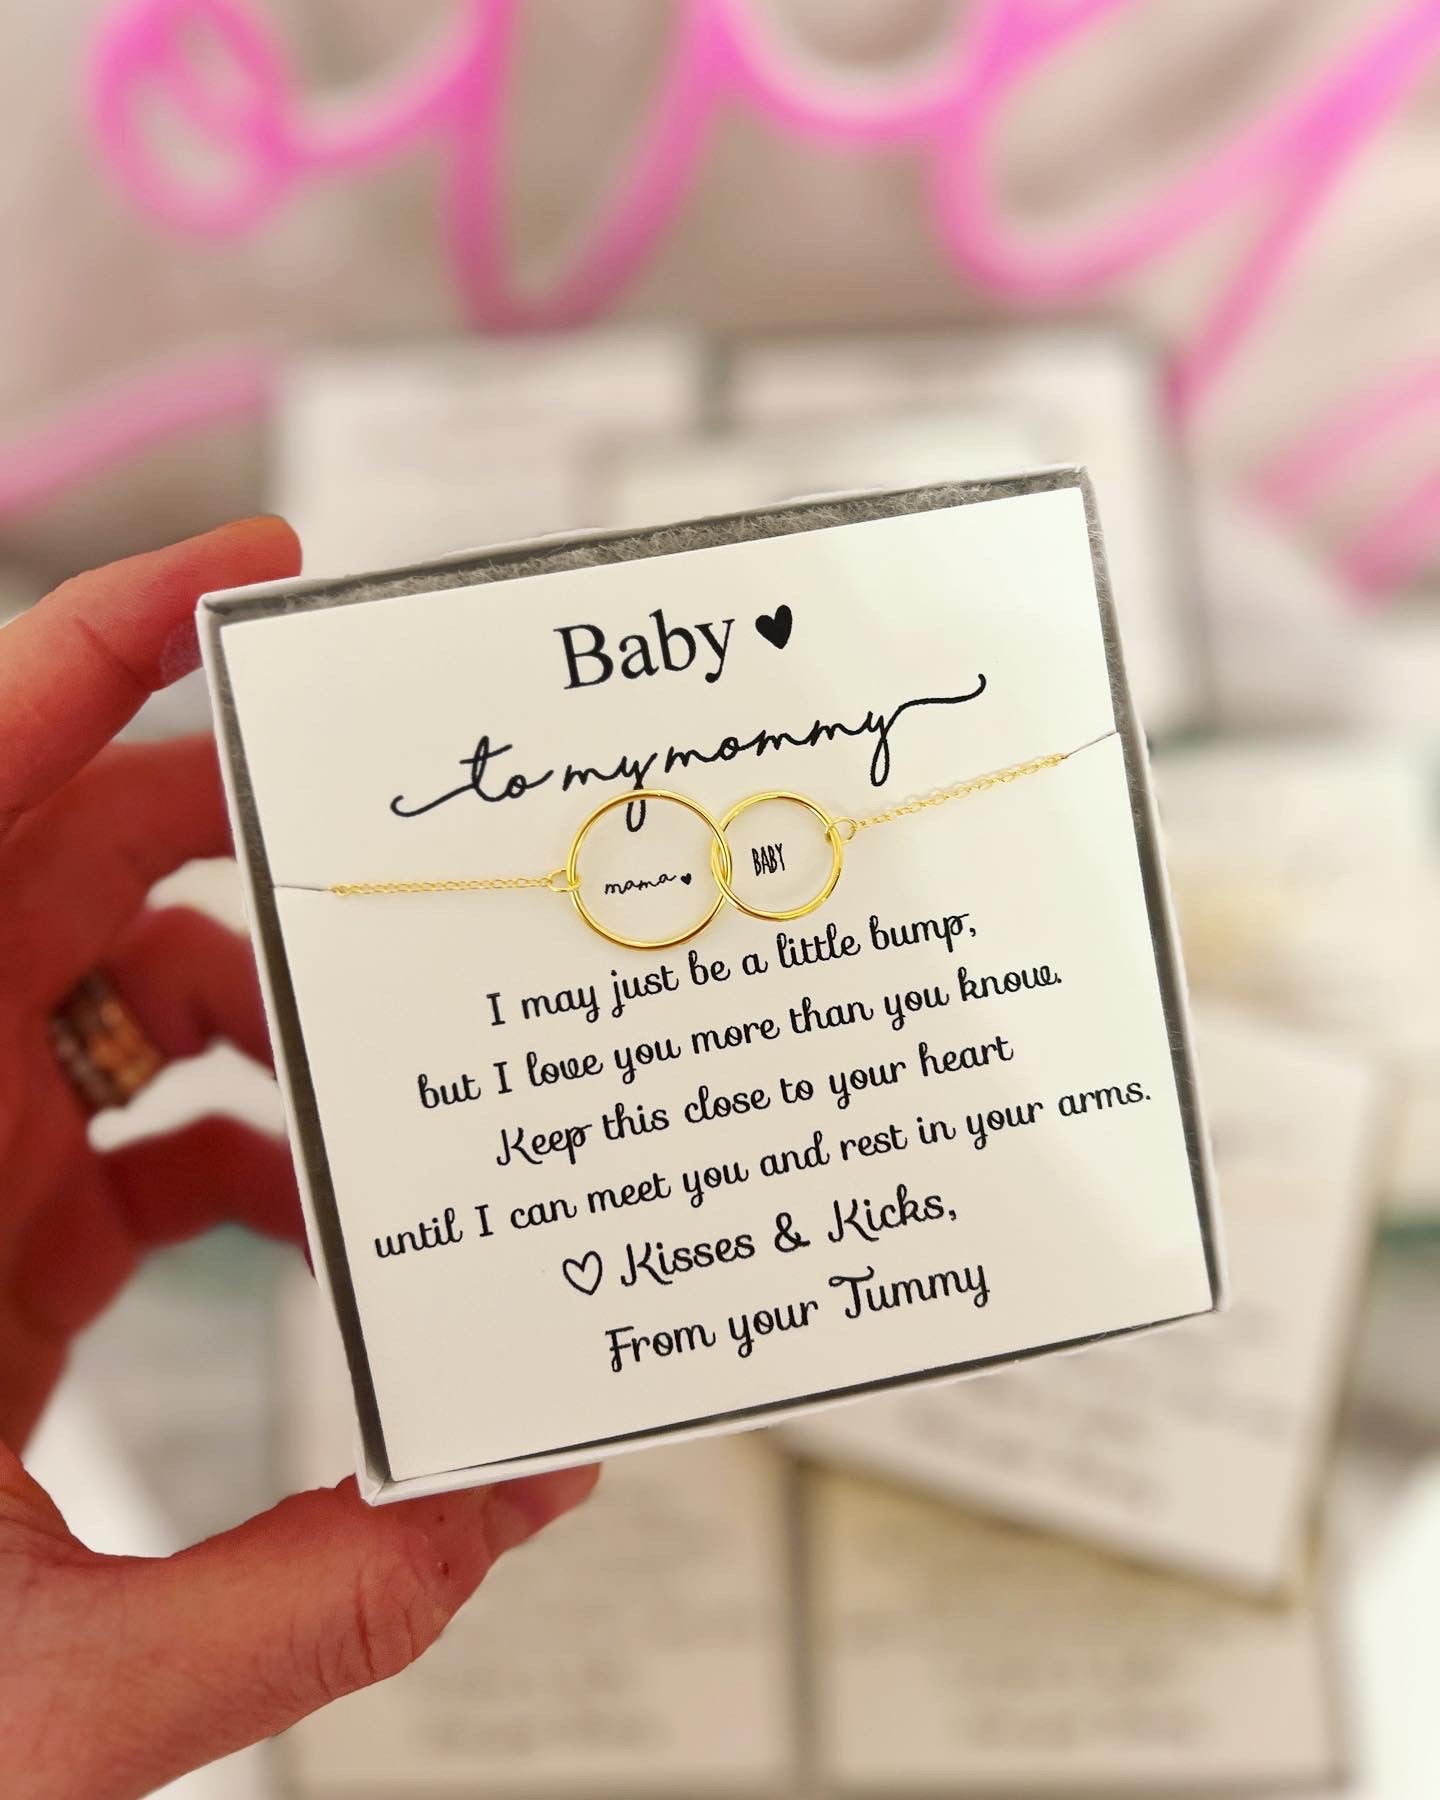 PREGNANCY CONGRATULATIONS - Mummy to Be -Mum to Be -Letterbox Gift Box  £14.00 - PicClick UK